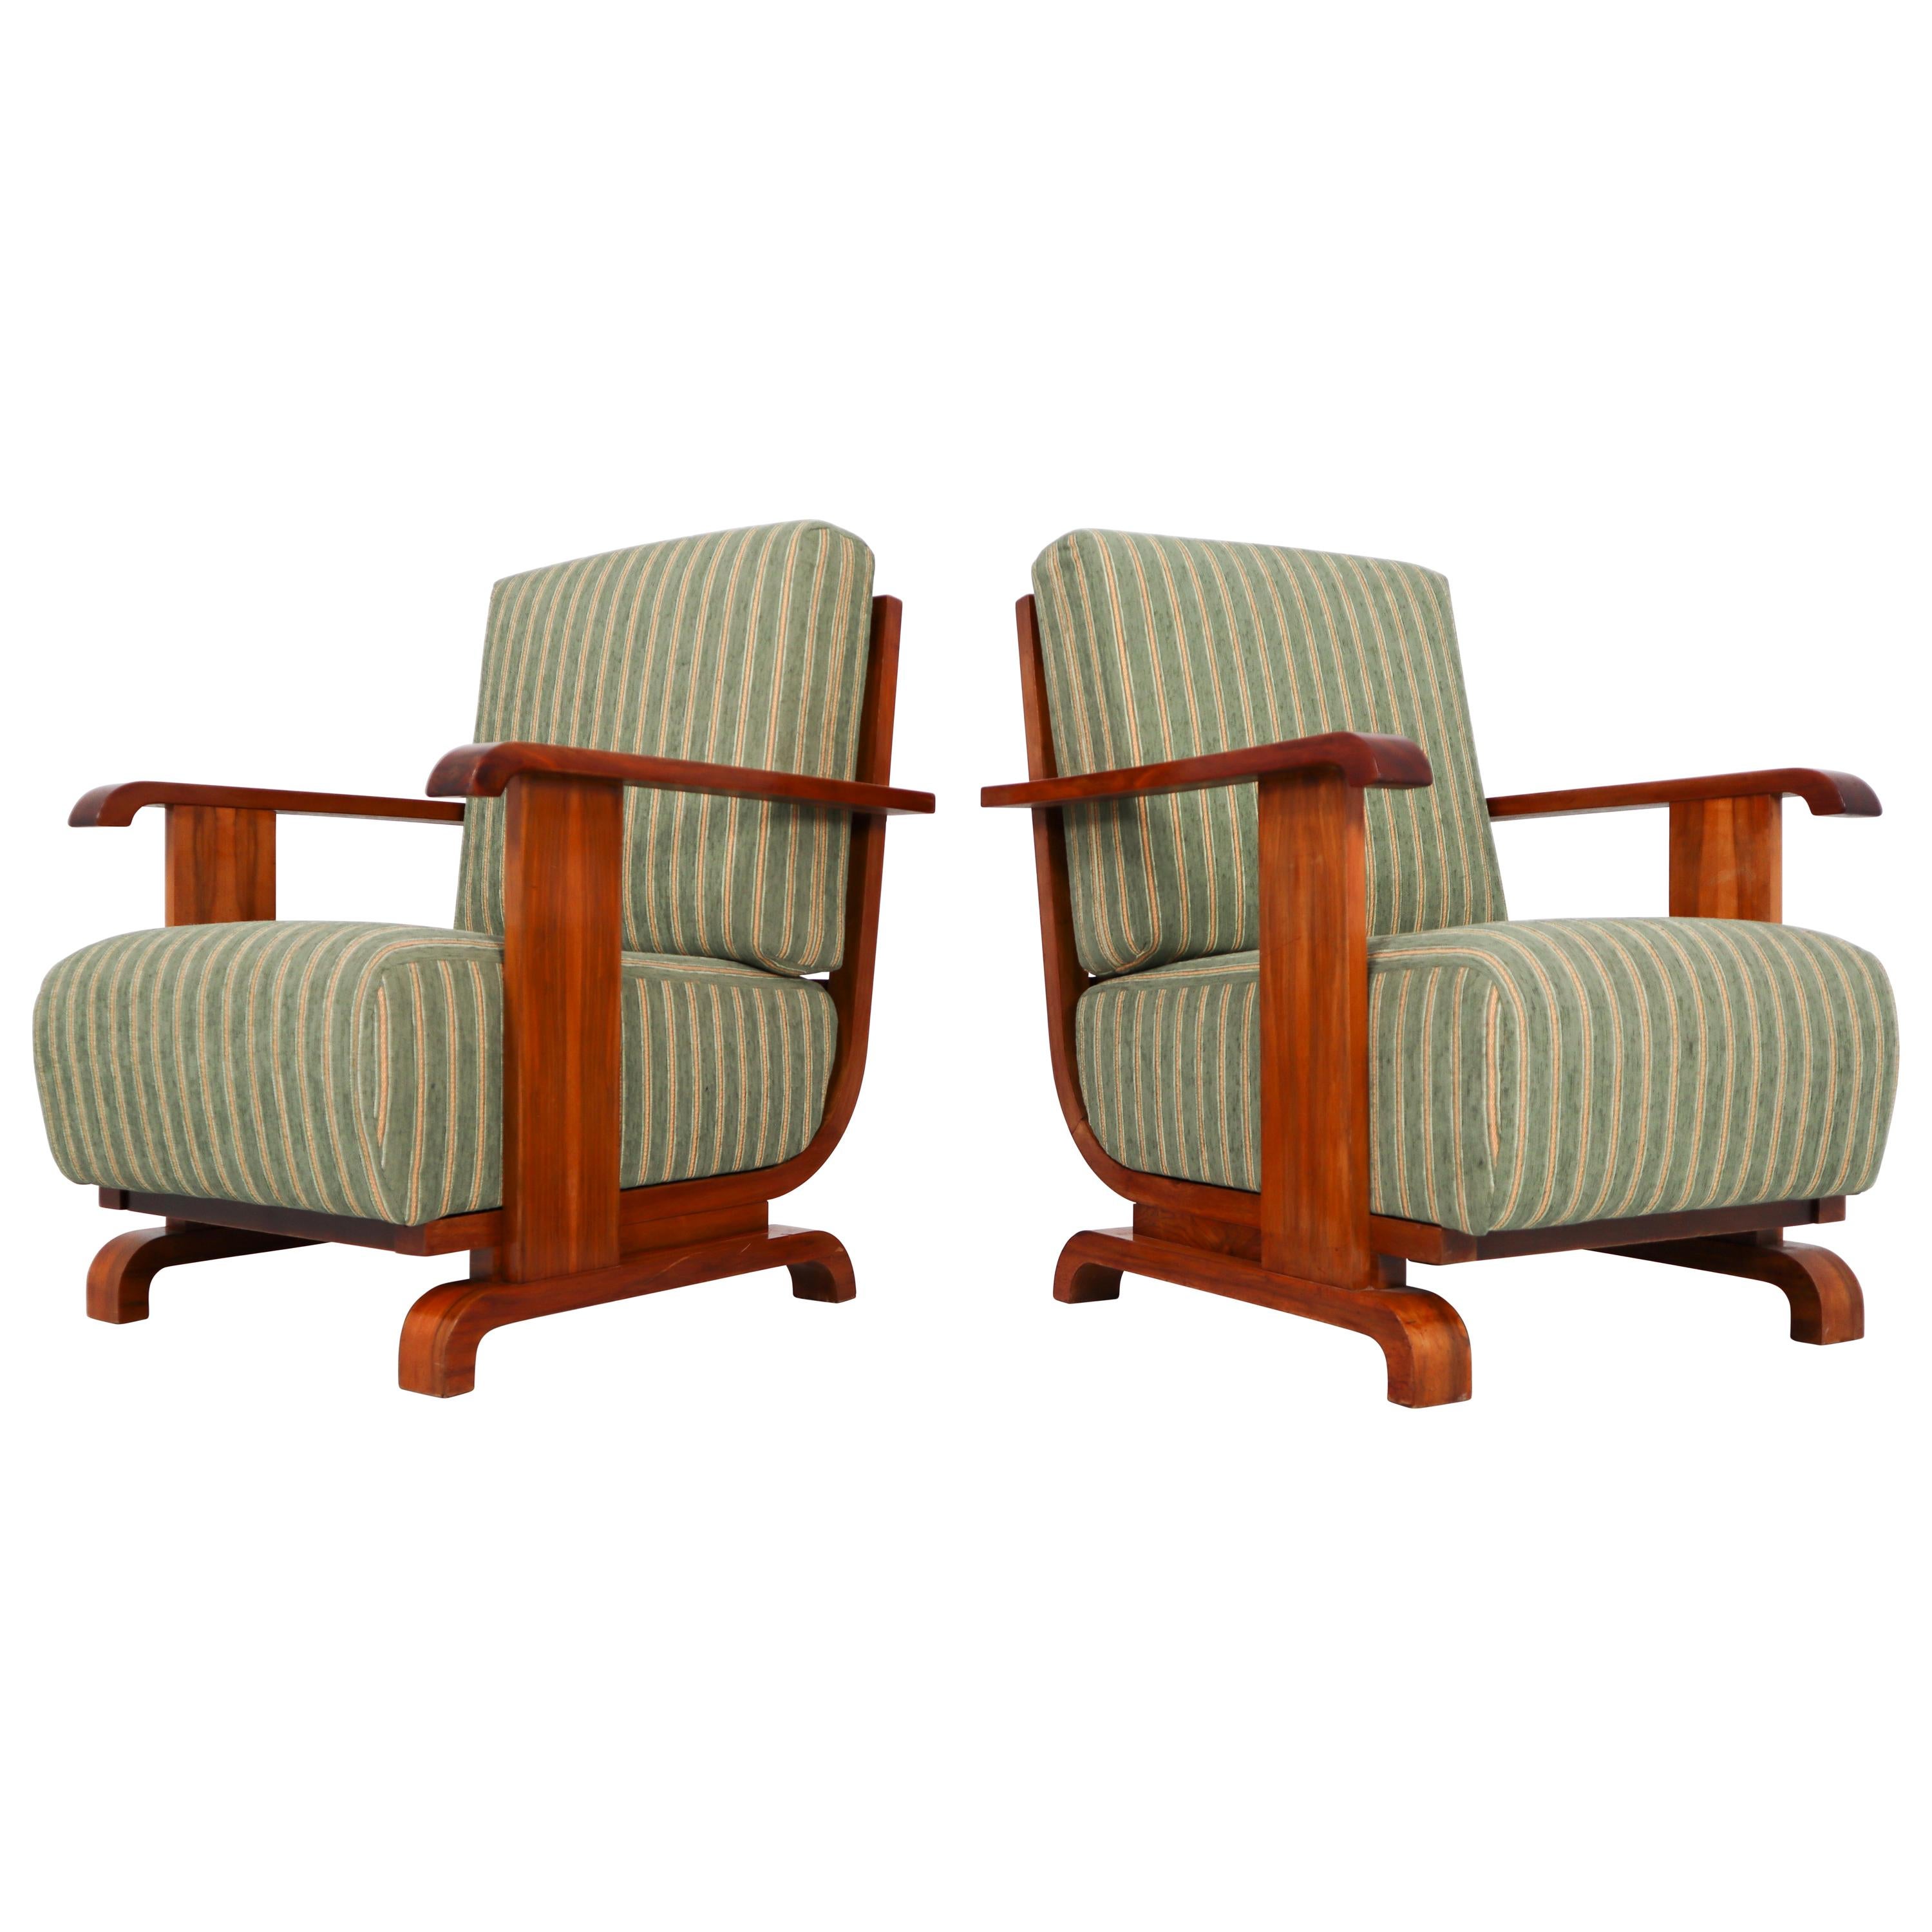 Art Deco Austrian Armchairs from Vienna in Walnut and Olive Green Velvet Blend